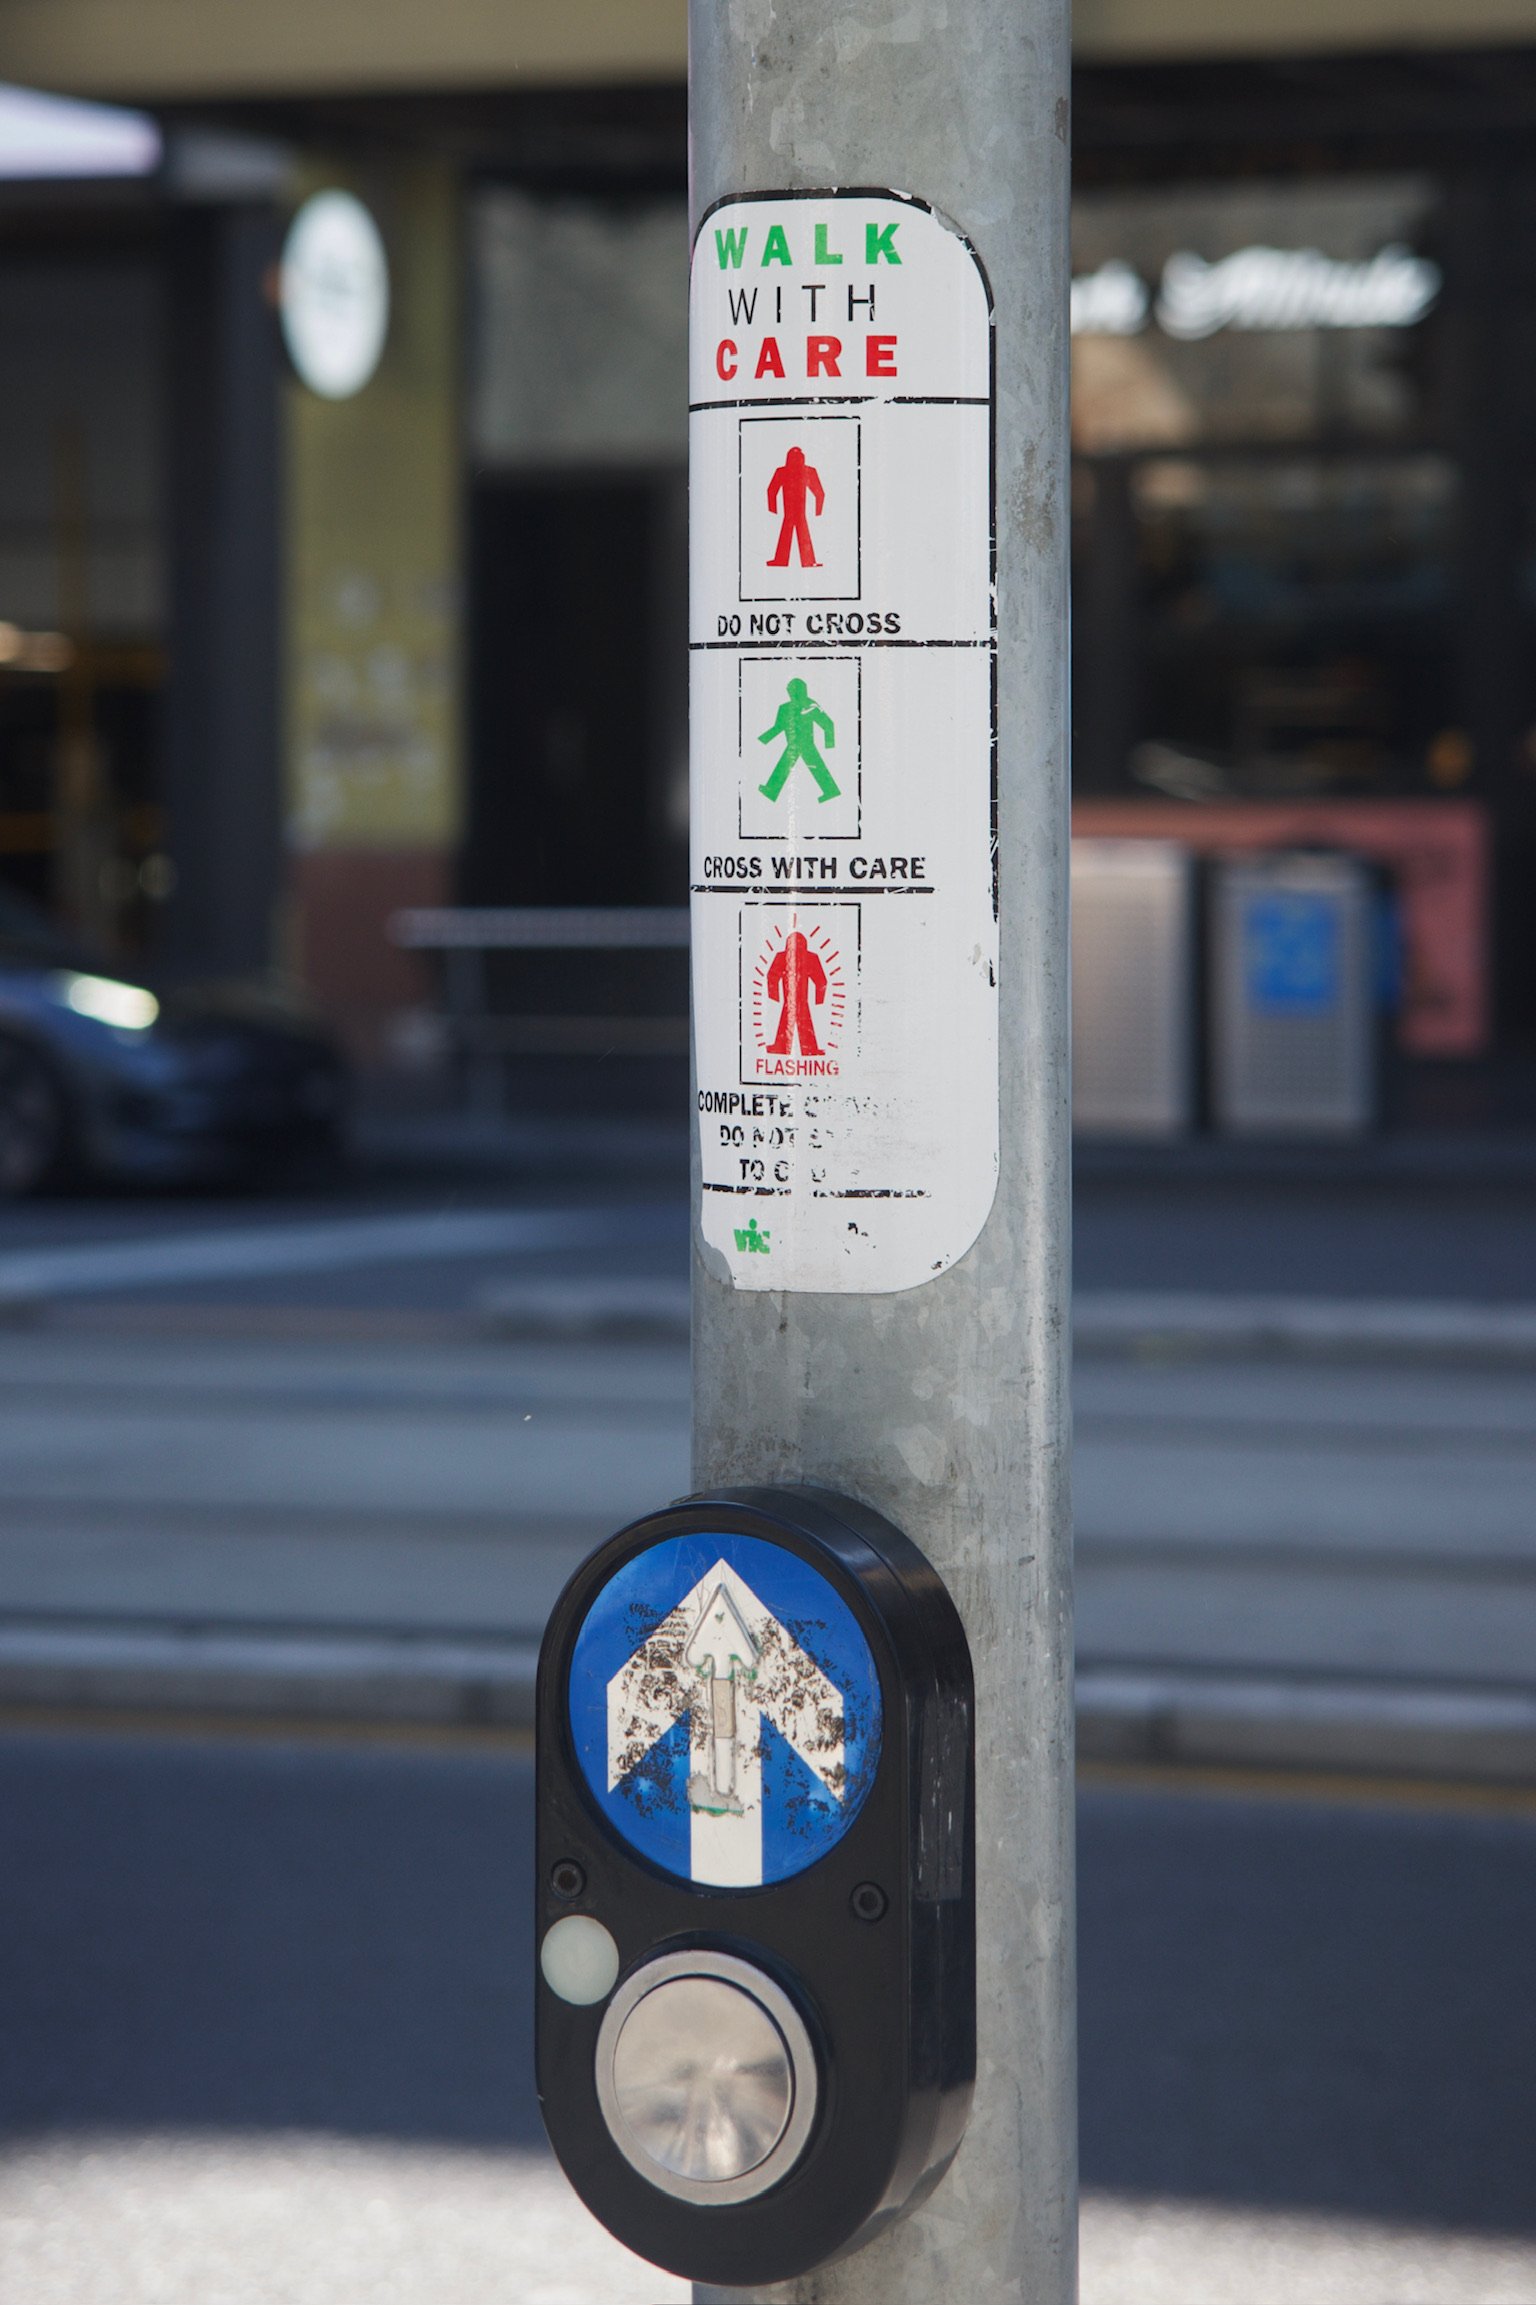 a sign on a pole for people to hit the button for crossing. red figure on the top, green figure in the middle walking, and a red muscle-y figure with shiny symbols around them at the bottom.